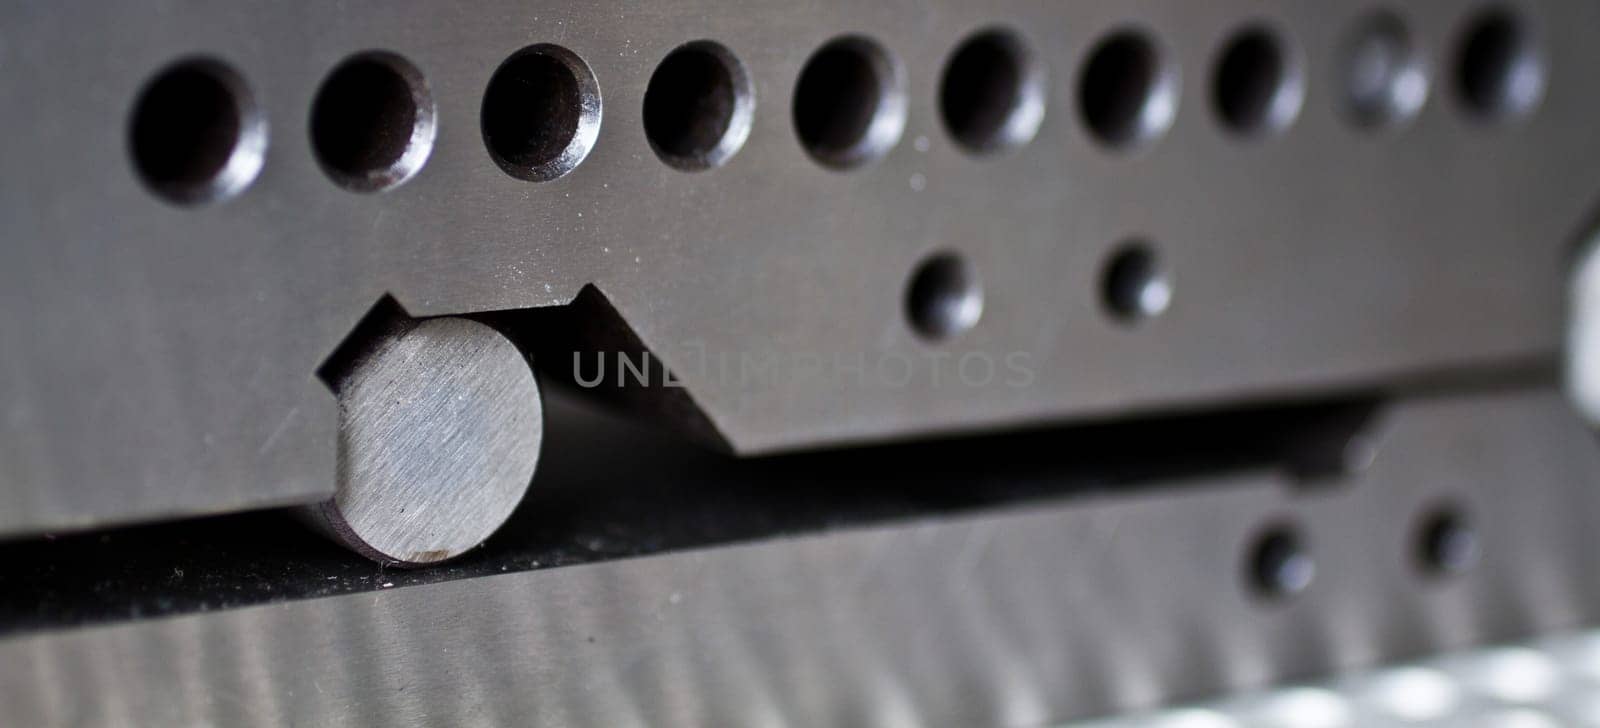 Precision Engineering Metal Peg in Hole Design Close-Up by njproductions